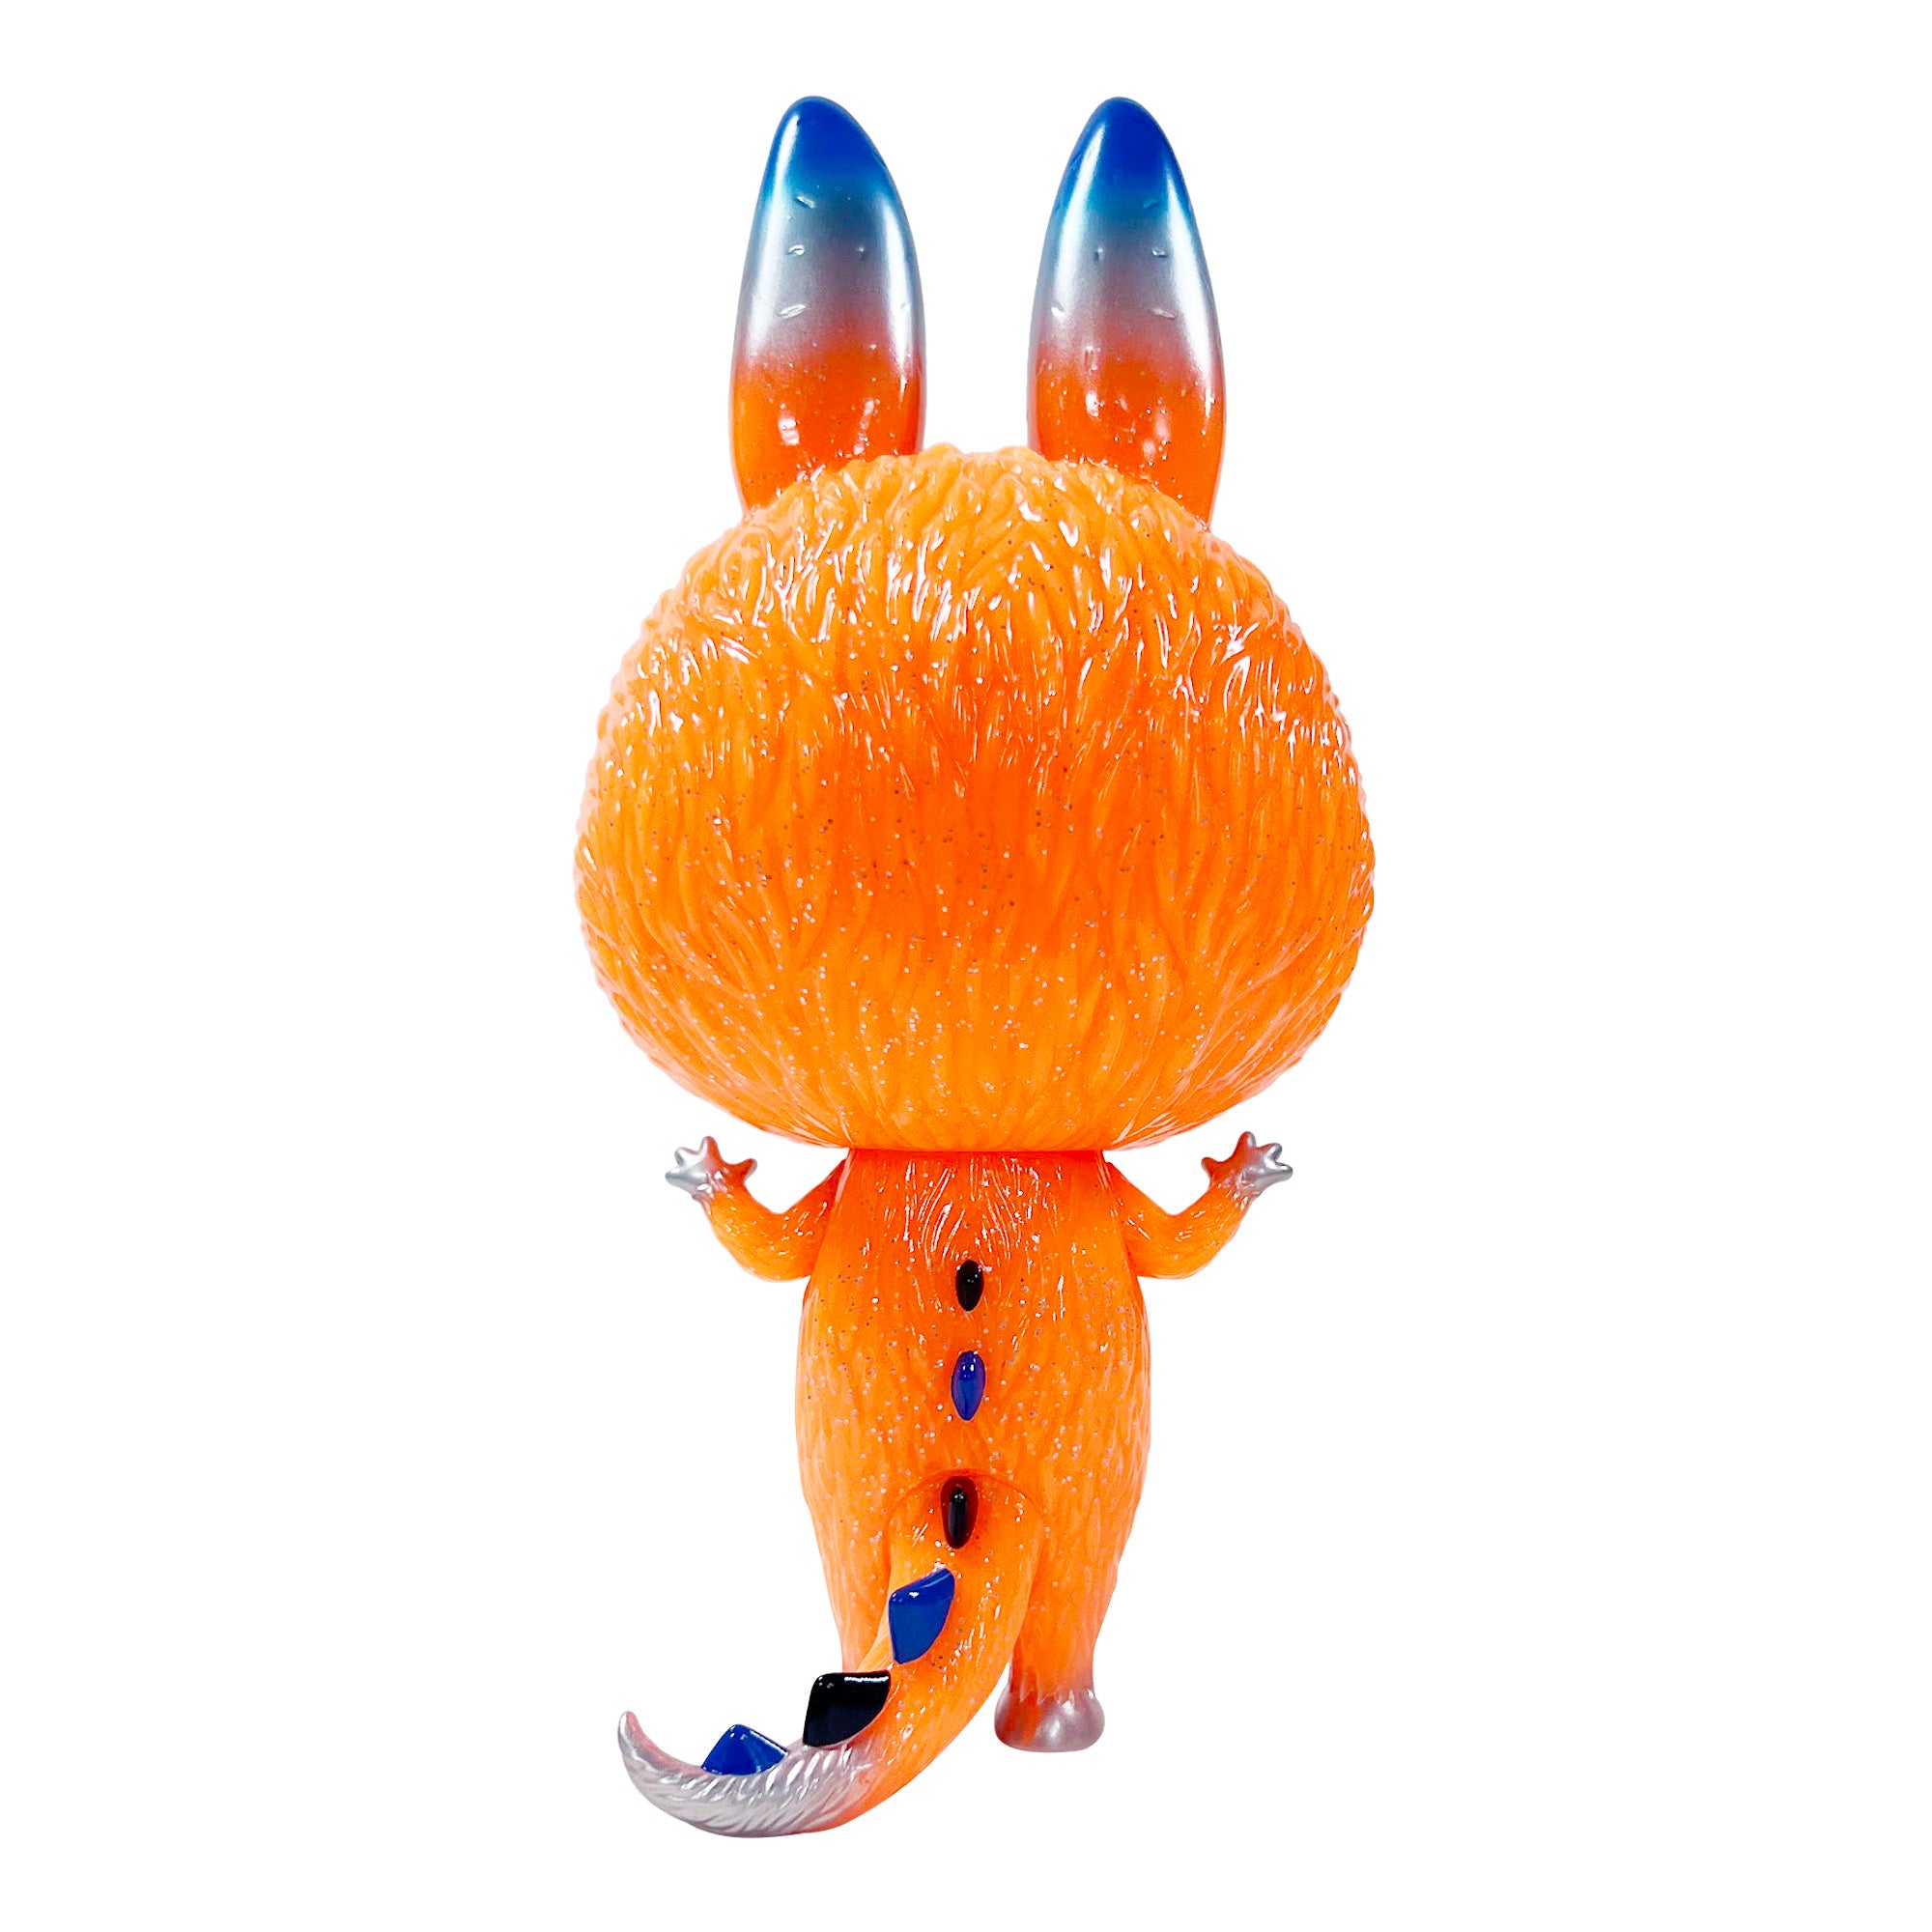 How2Work x Kasing Lung - Zimomo Toy Tokyo Exclusive